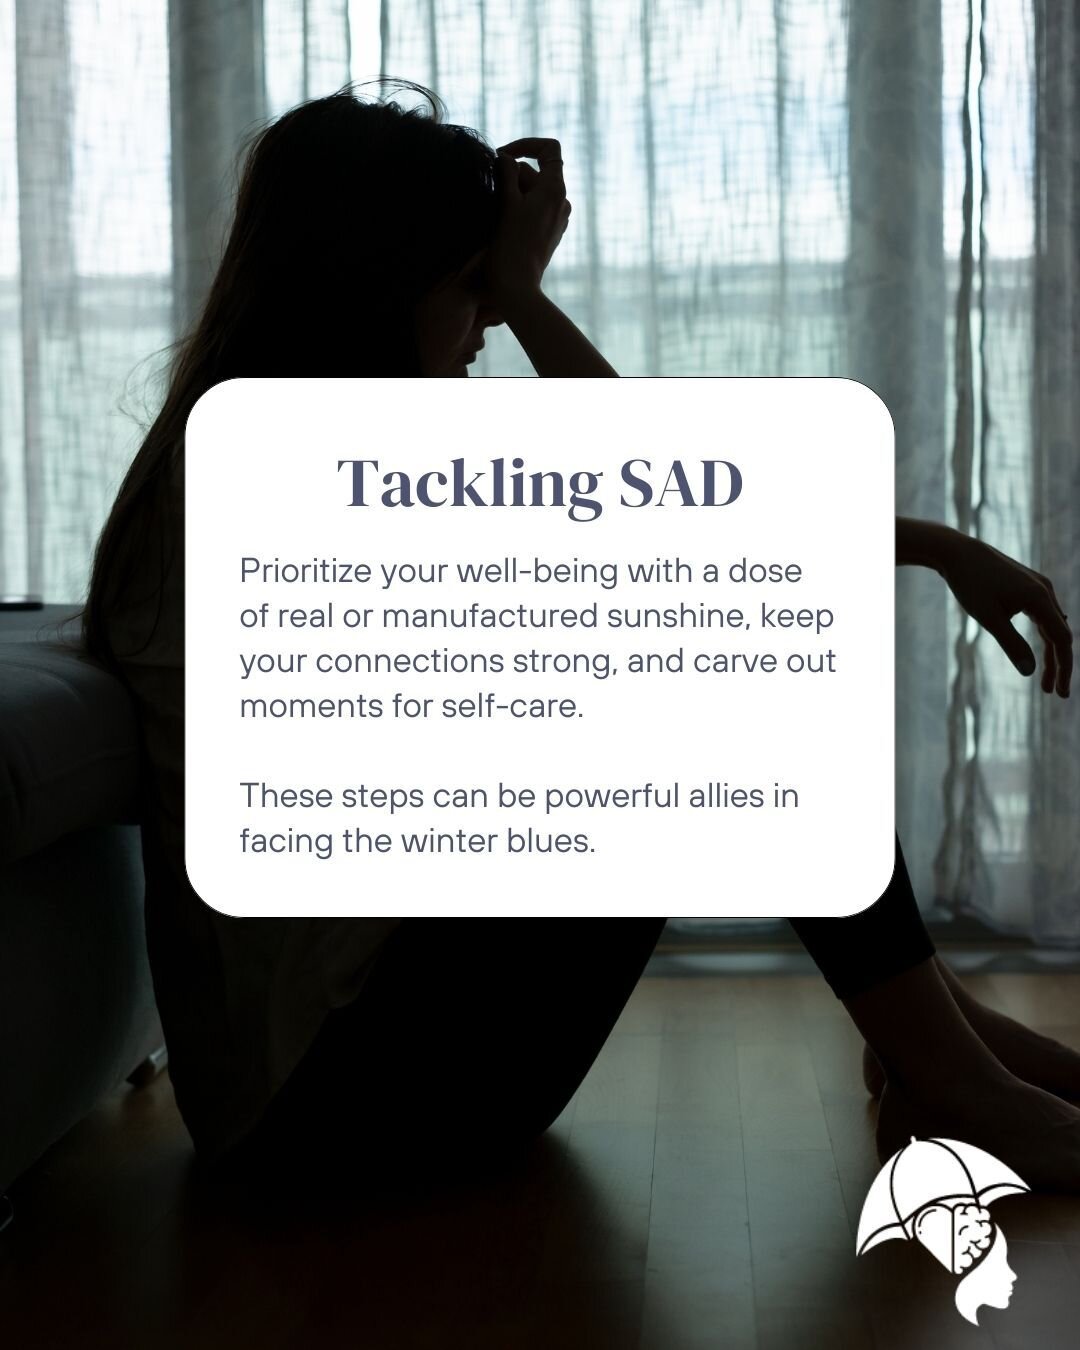 We are currently deep in those long winter days where Seasonal Affective Disorder (SAD) commonly strikes.  This form of depression often shows up like an uninvited winter guest. 🌨️ As daylight dwindles and the skies remain cloudy, it can trigger fee